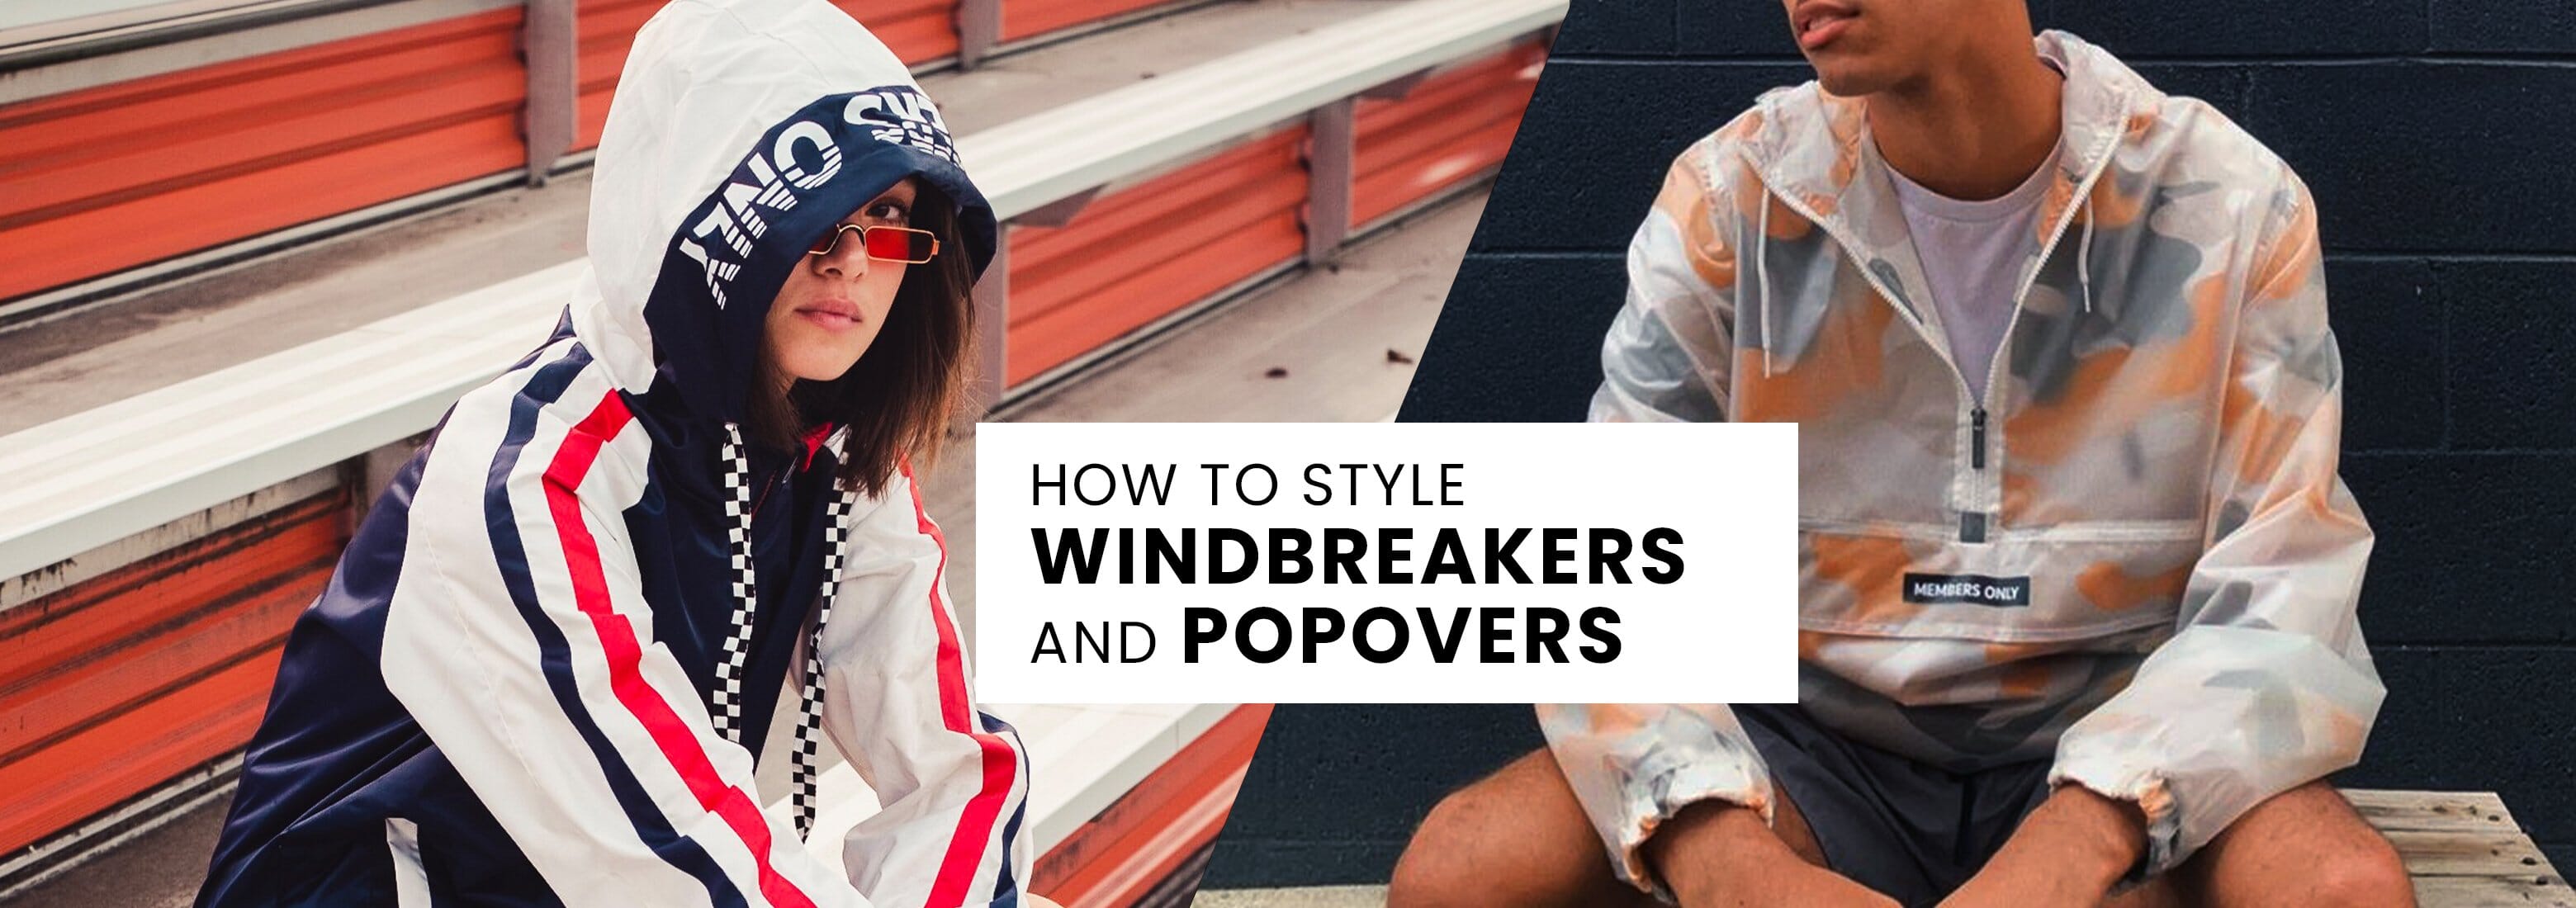 How to style Windbreakers and Popovers